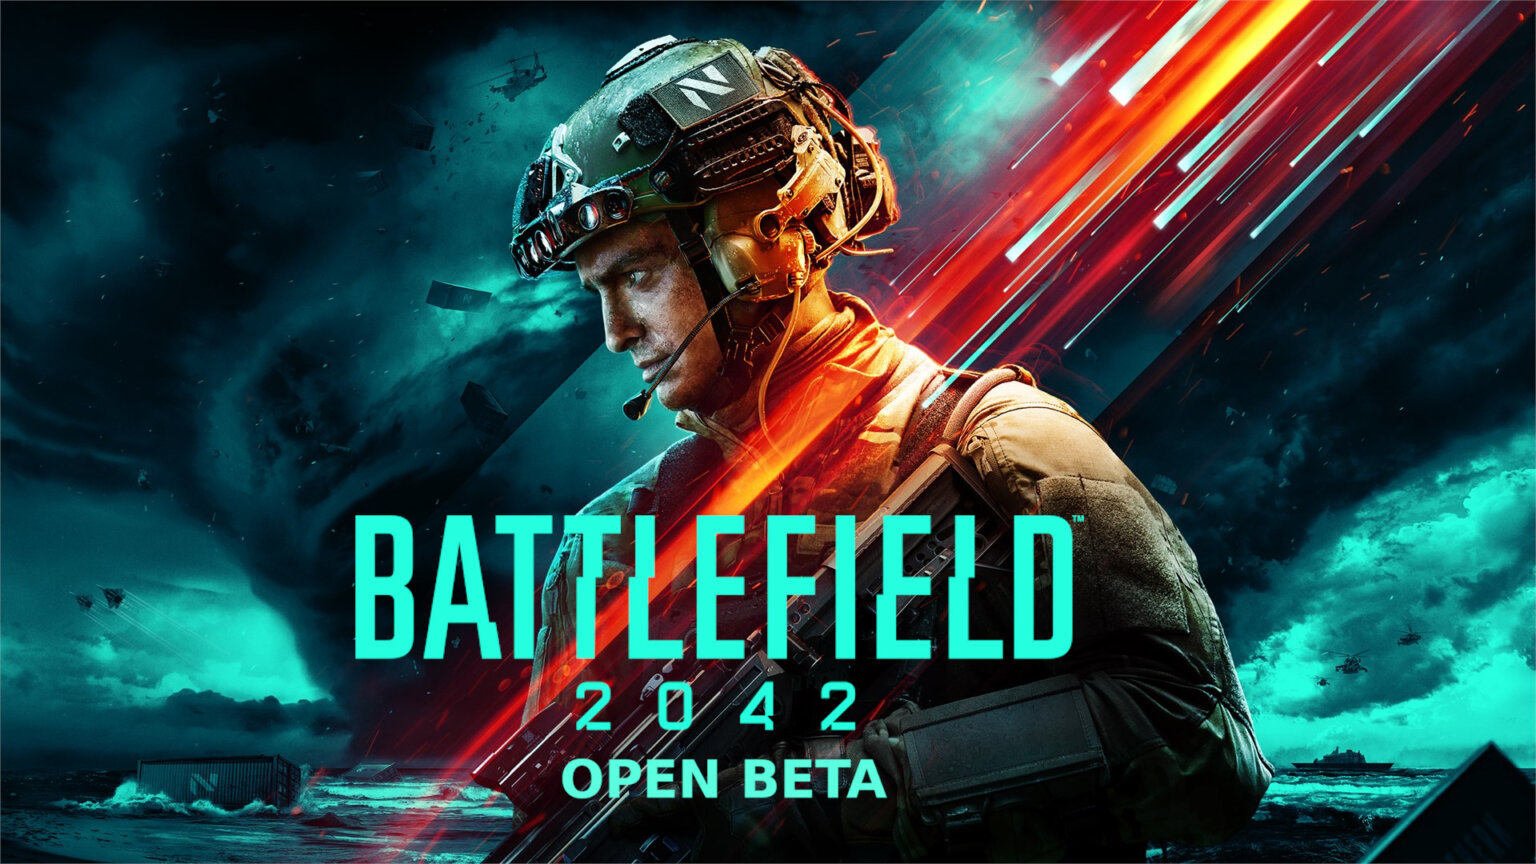 How to play Battlefield 2042 Beta? Know More about the release date